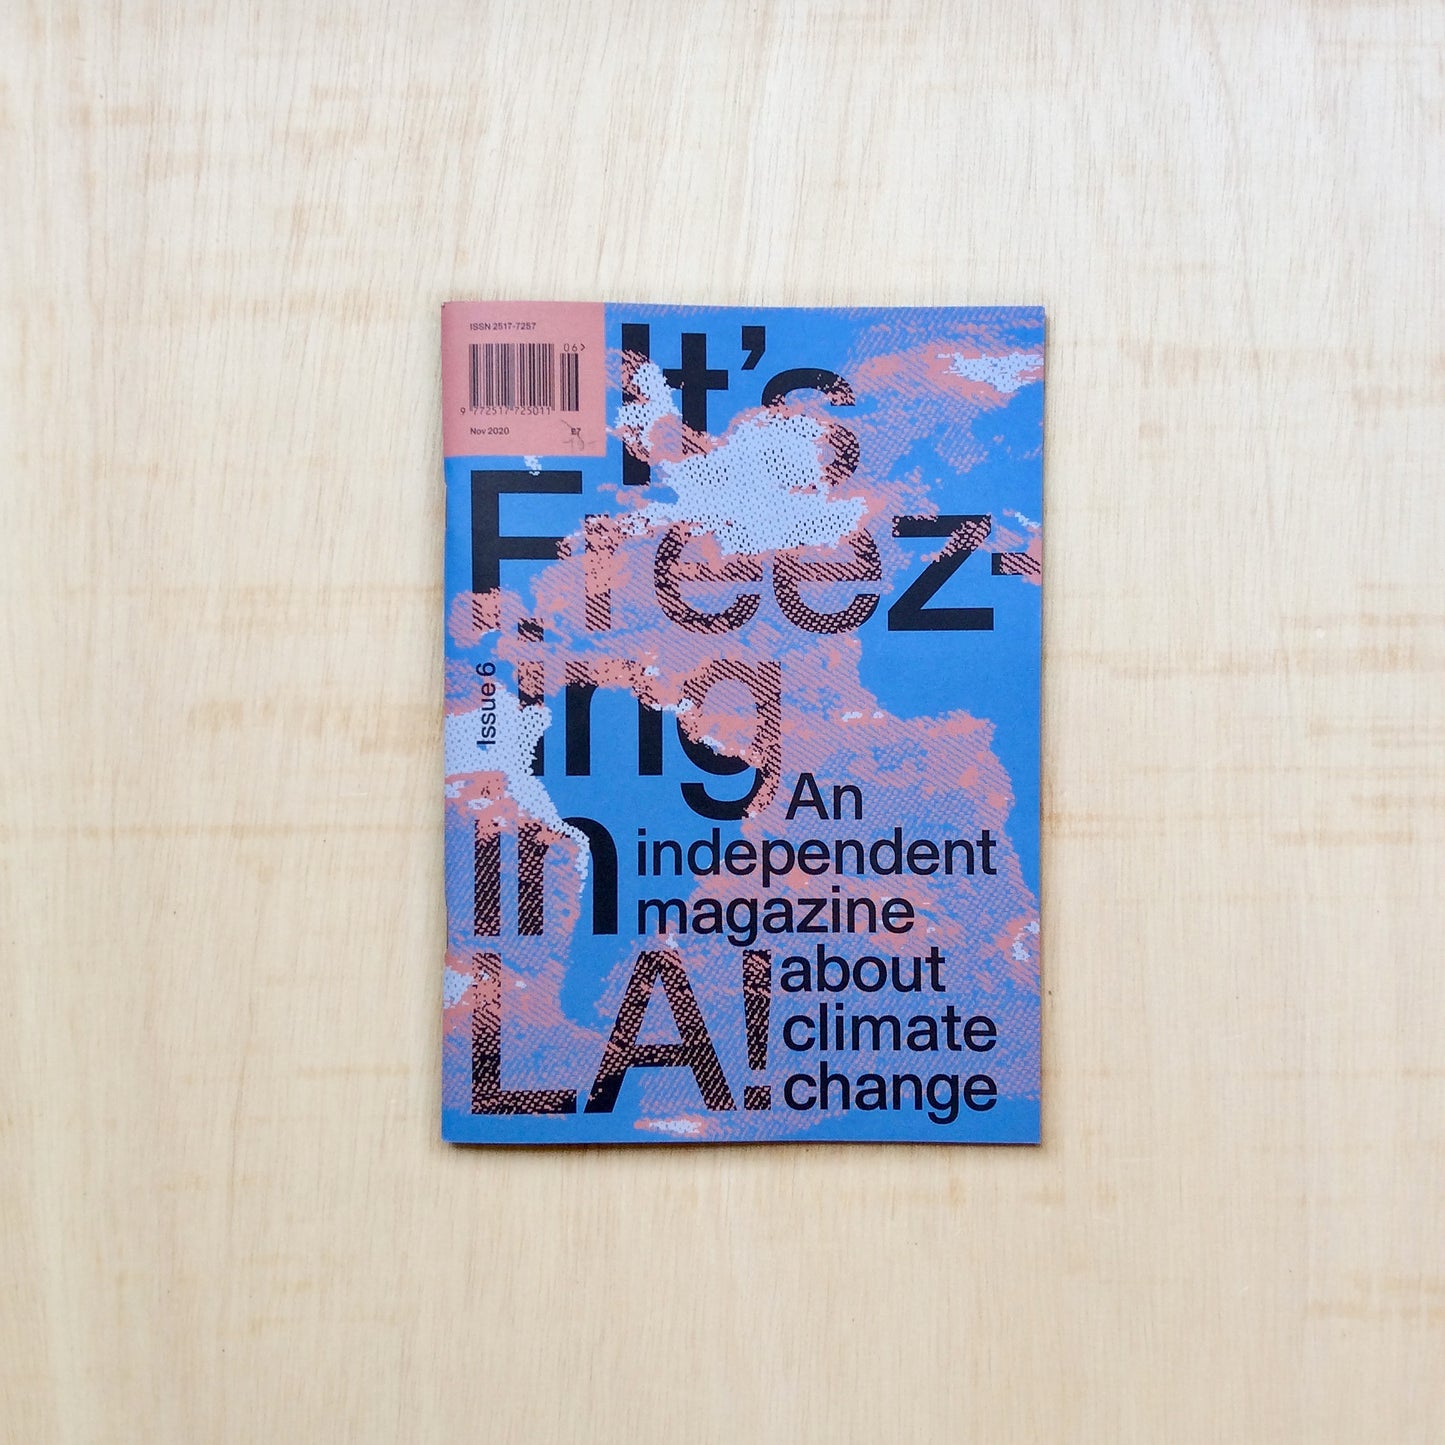 It's freezing in LA! Issue 6 - Greenwashing - an independent magazine about climate change